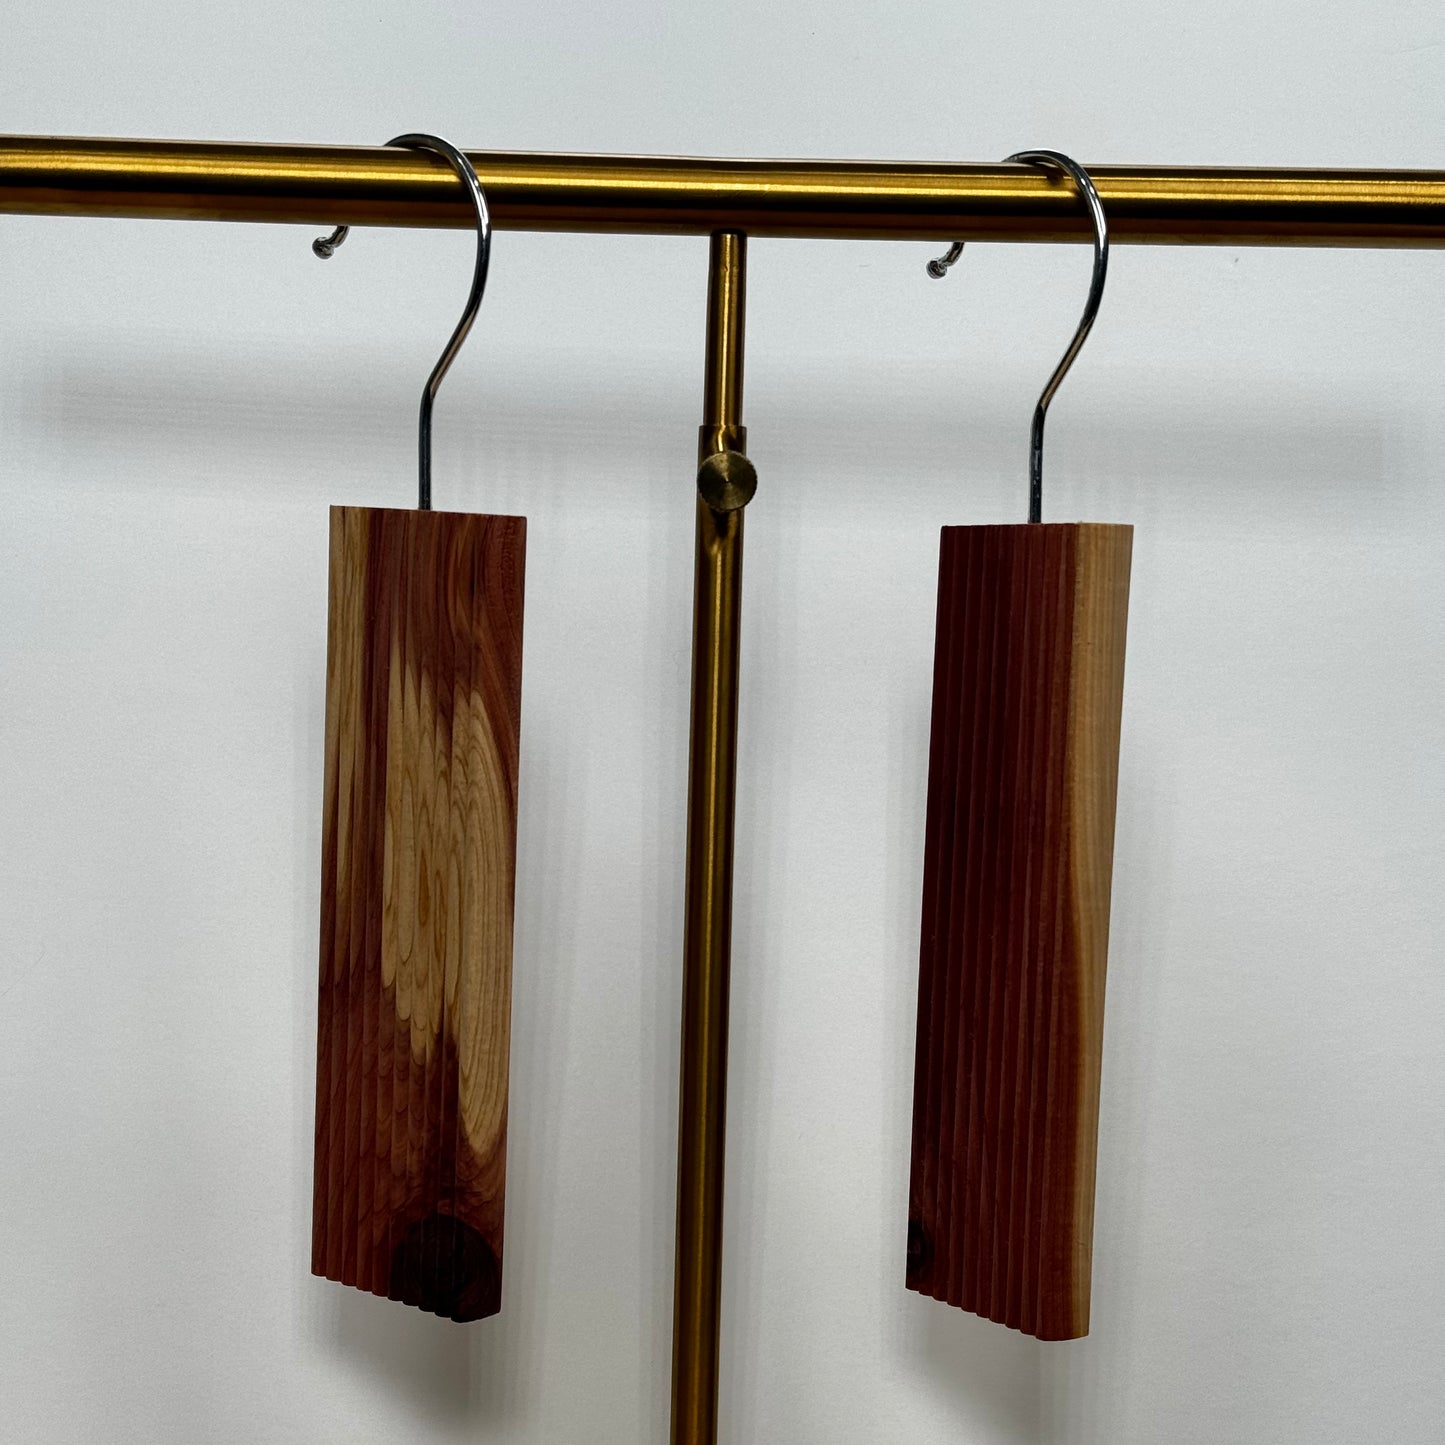 Two Scented Cedar Wood Hangups with Hook for Closets on a gold rack against a white wall.